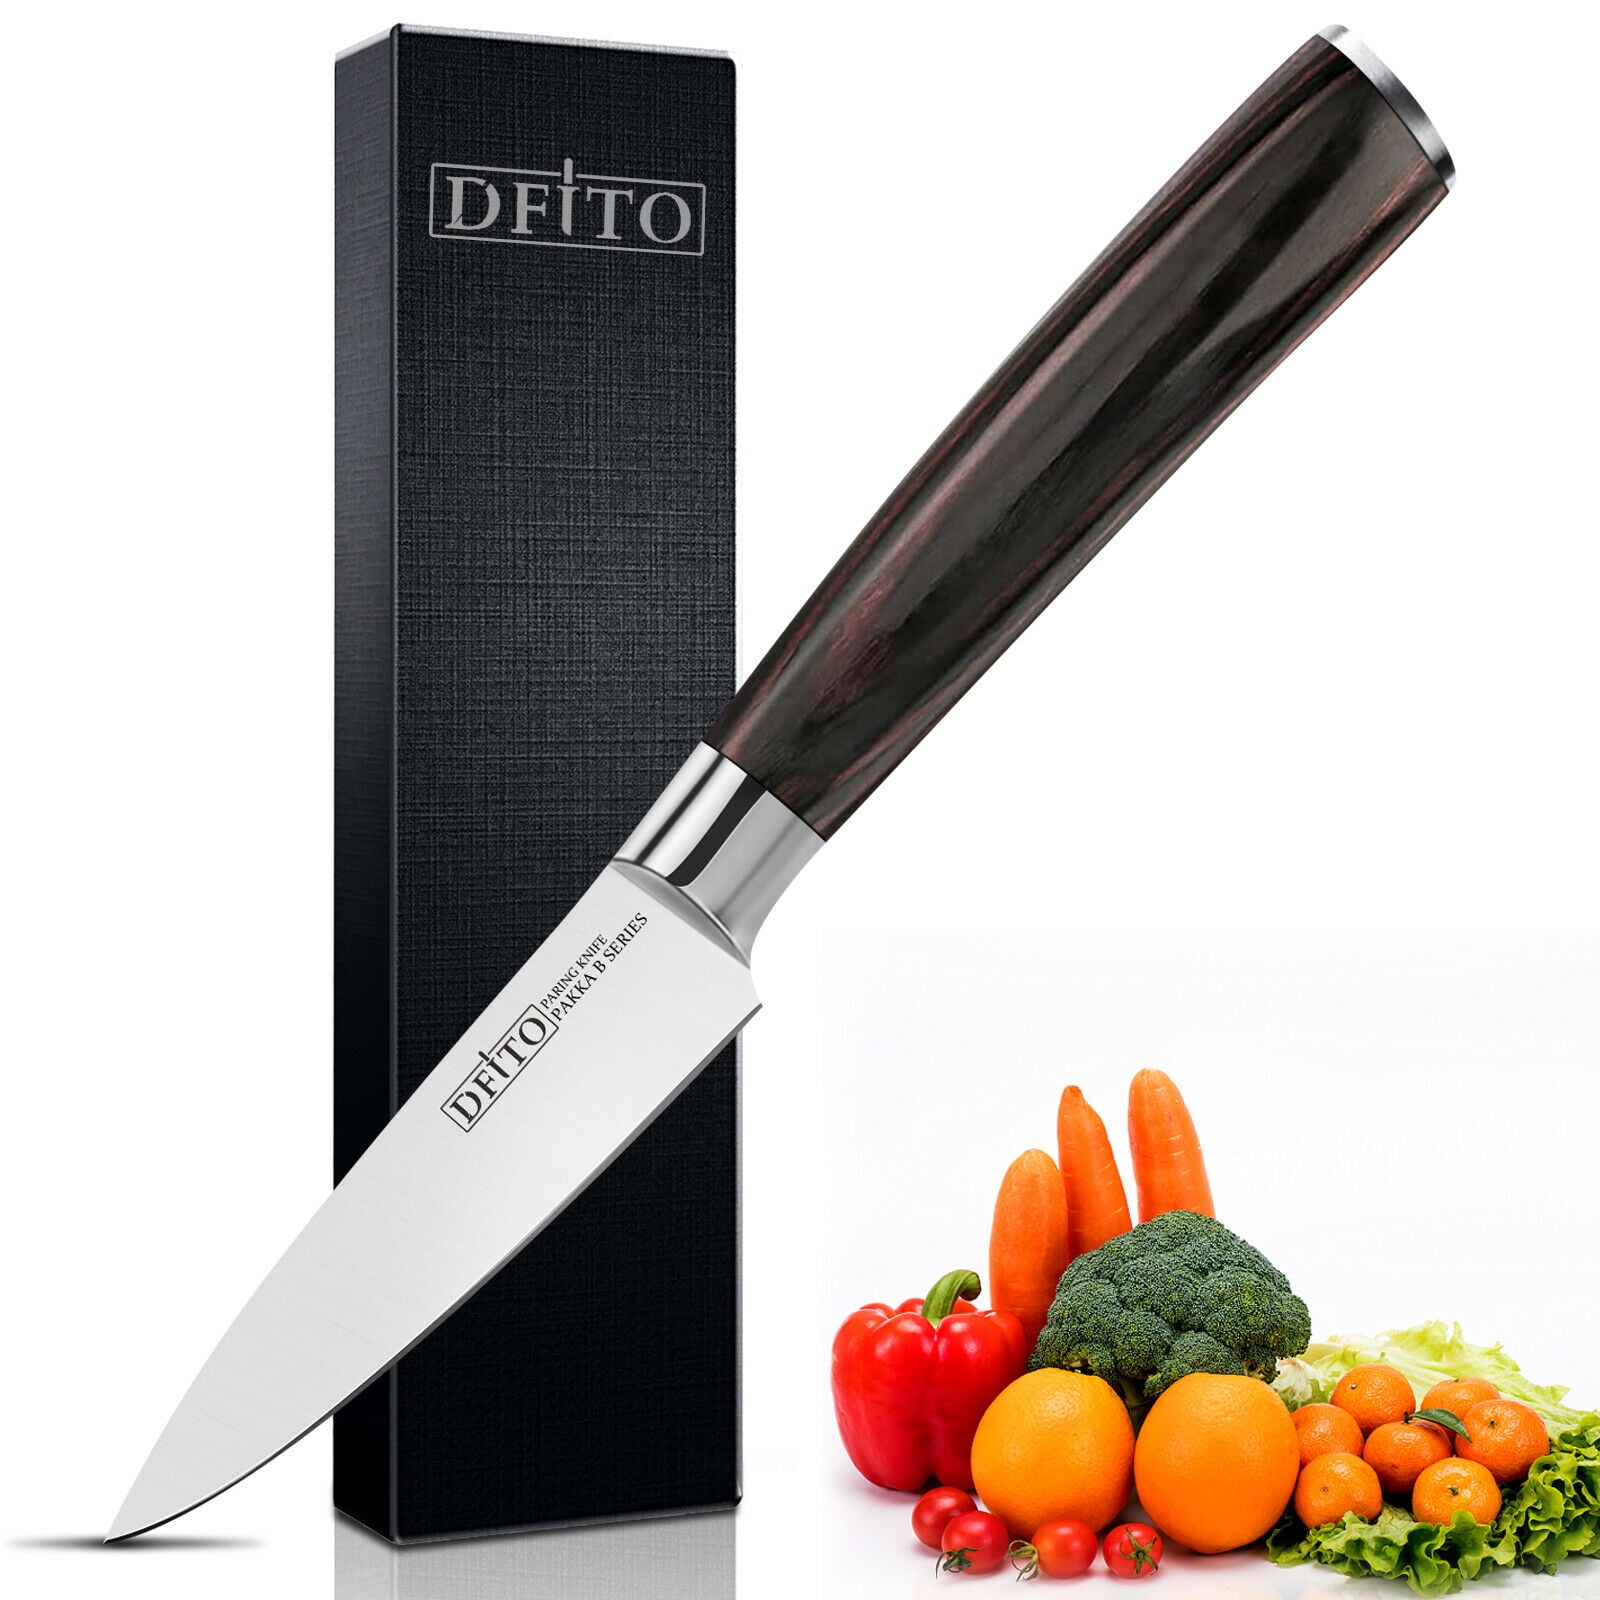 Paring Knife - PAUDIN 3.5 inch Kitchen Knife N8 German High Carbon Stainless Steel Knife, Fruit and Vegetable Cutting Chopping Carving Knives